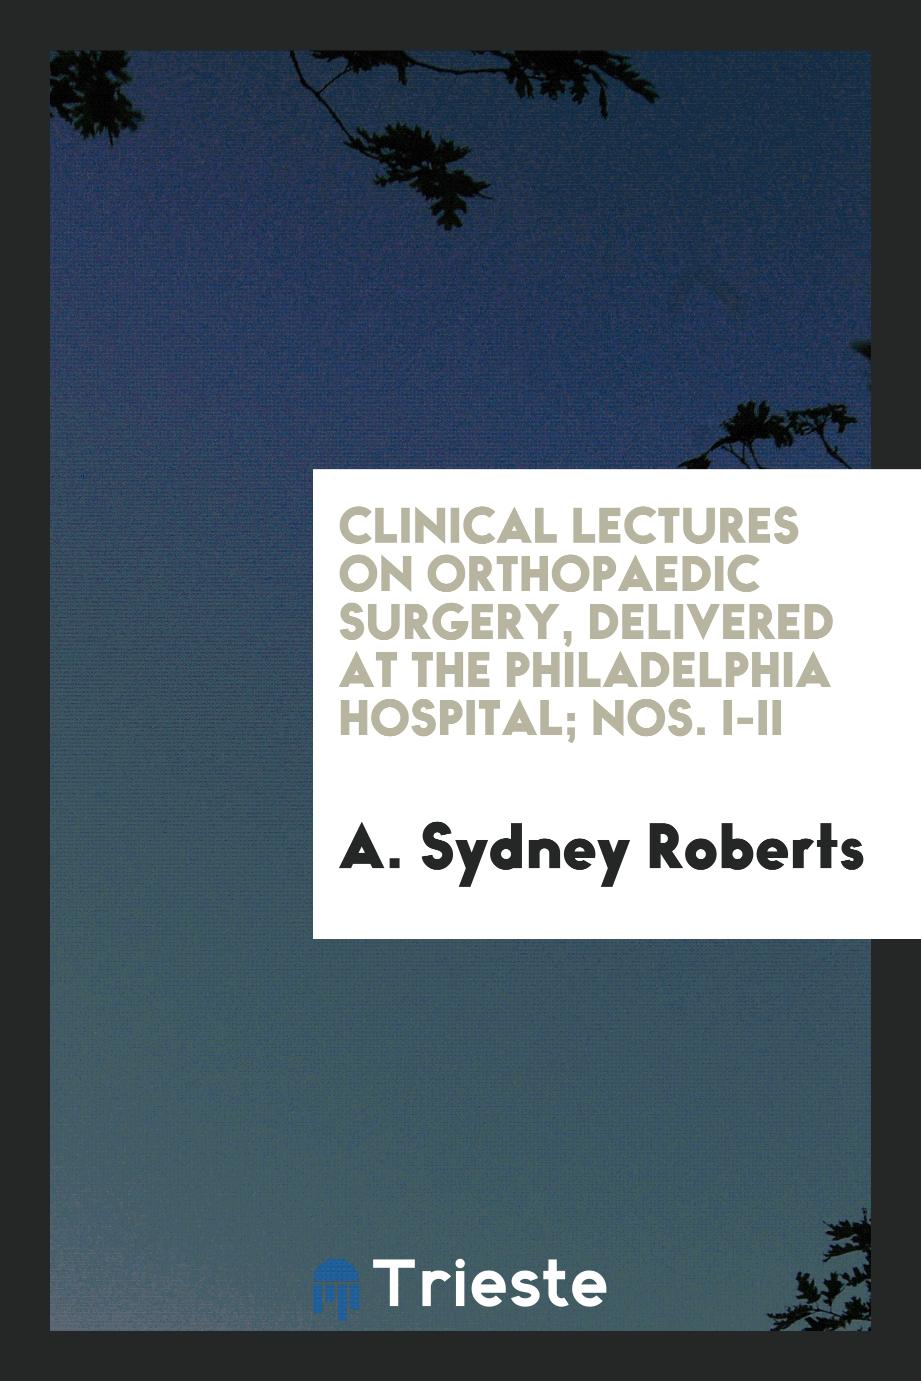 Clinical lectures on orthopaedic surgery, delivered at the Philadelphia Hospital; Nos. I-II